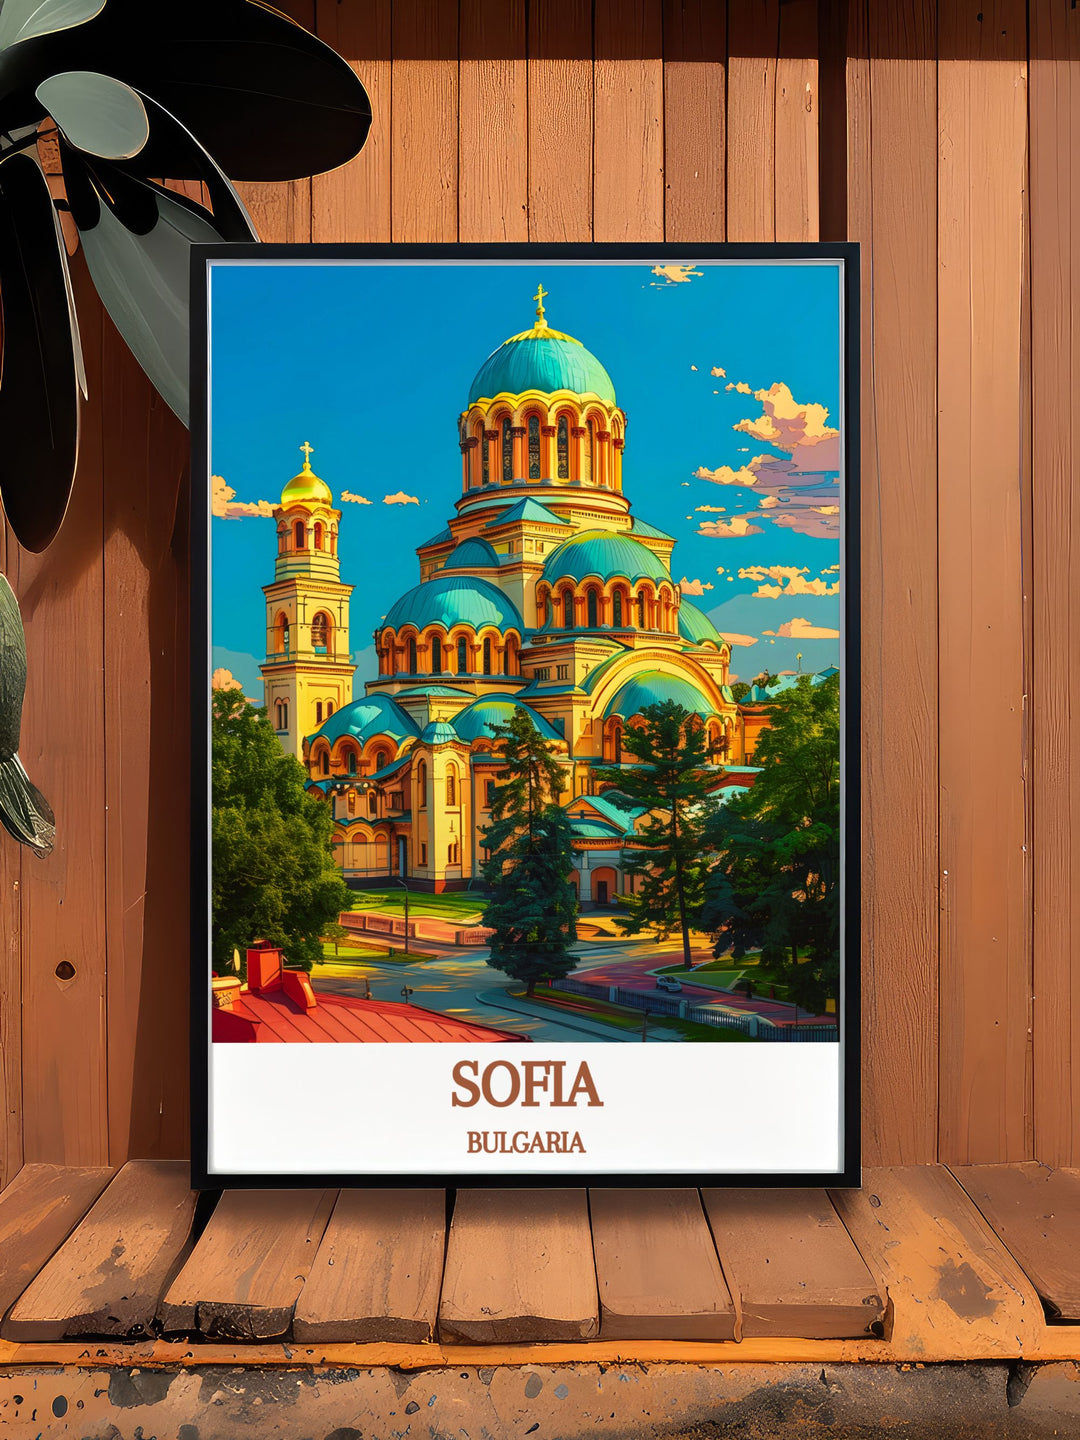 High quality Sofia Photo of BULGARIA St. Alexander Nevsky Cathedral showcasing its stunning architectural splendor perfect for adding a sophisticated touch to your home or office.